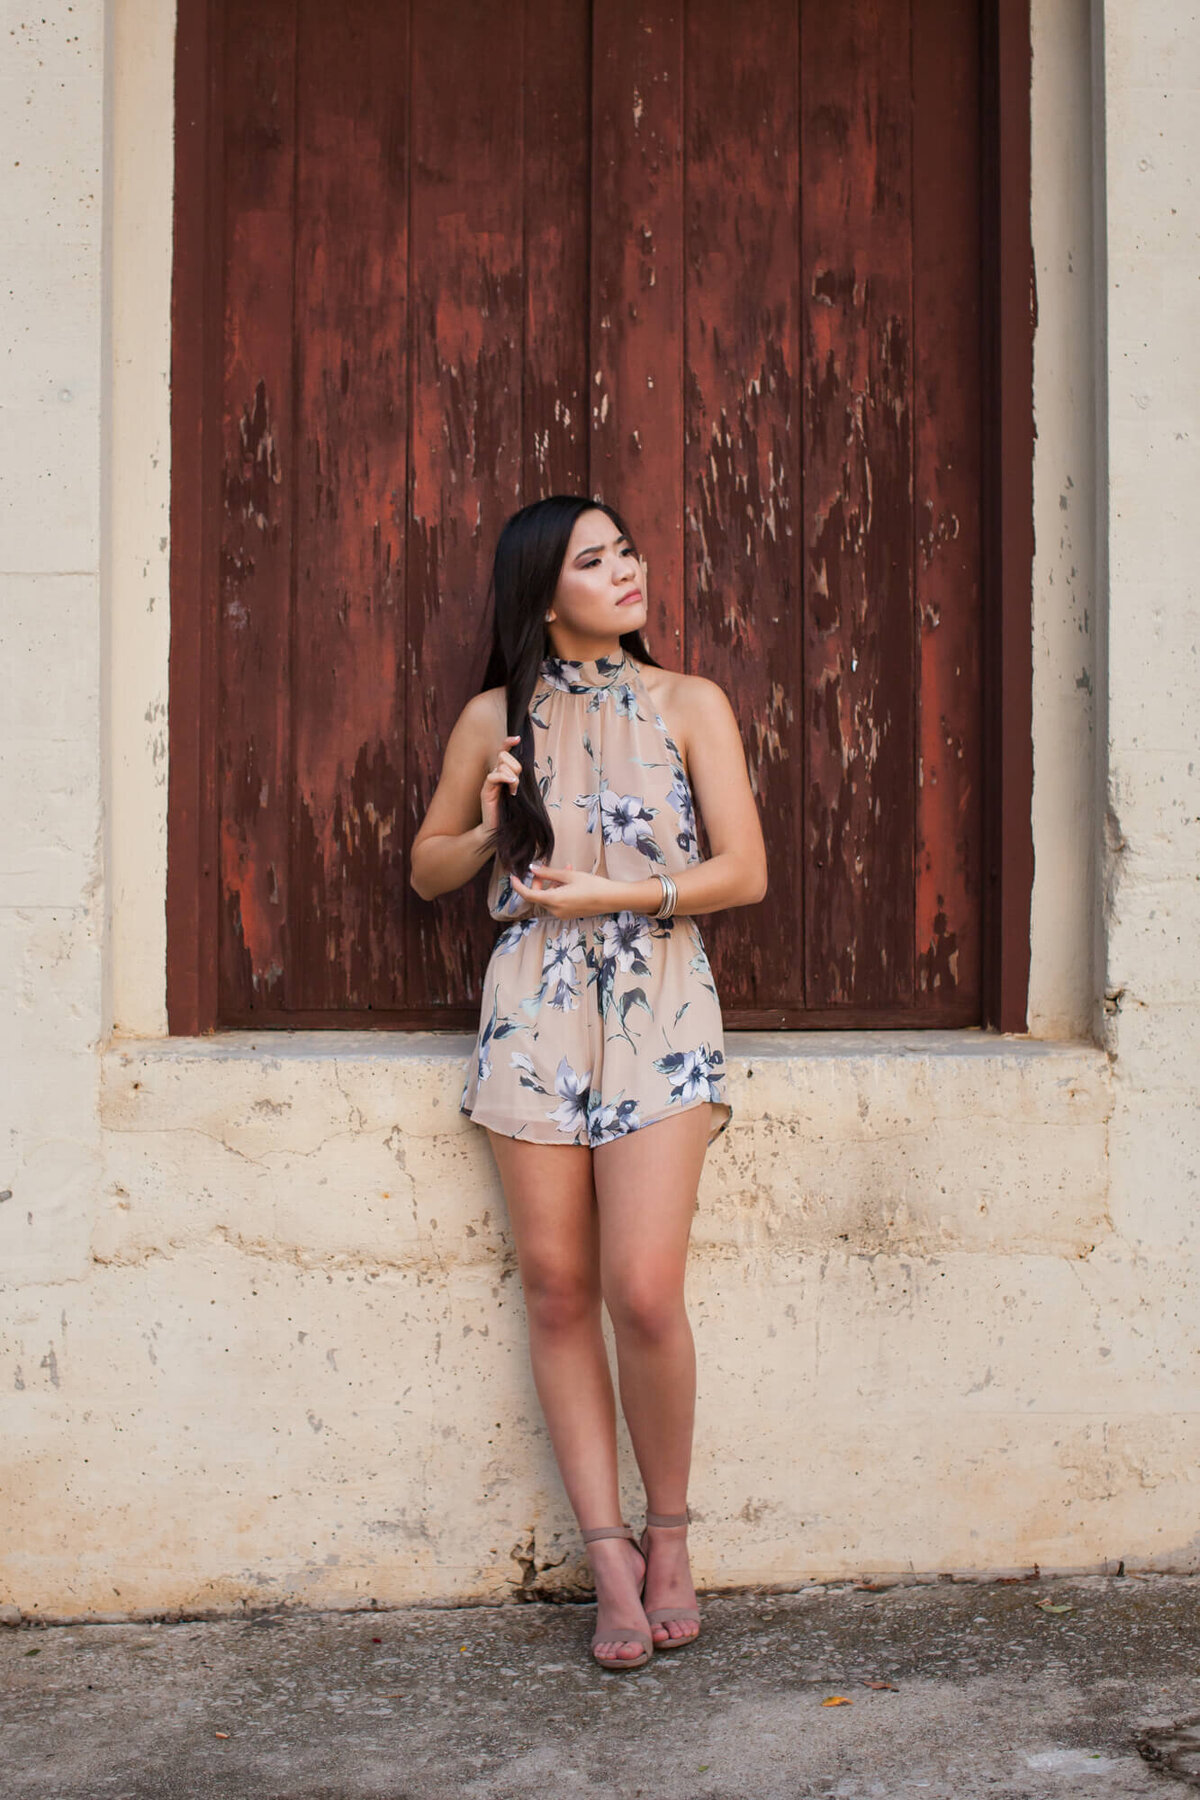 A lovely black haired senior girl poses casually in front of a rusty colored wooden shuttered window. Captured by Springfield, MO senior photographer Dynae Levingston.